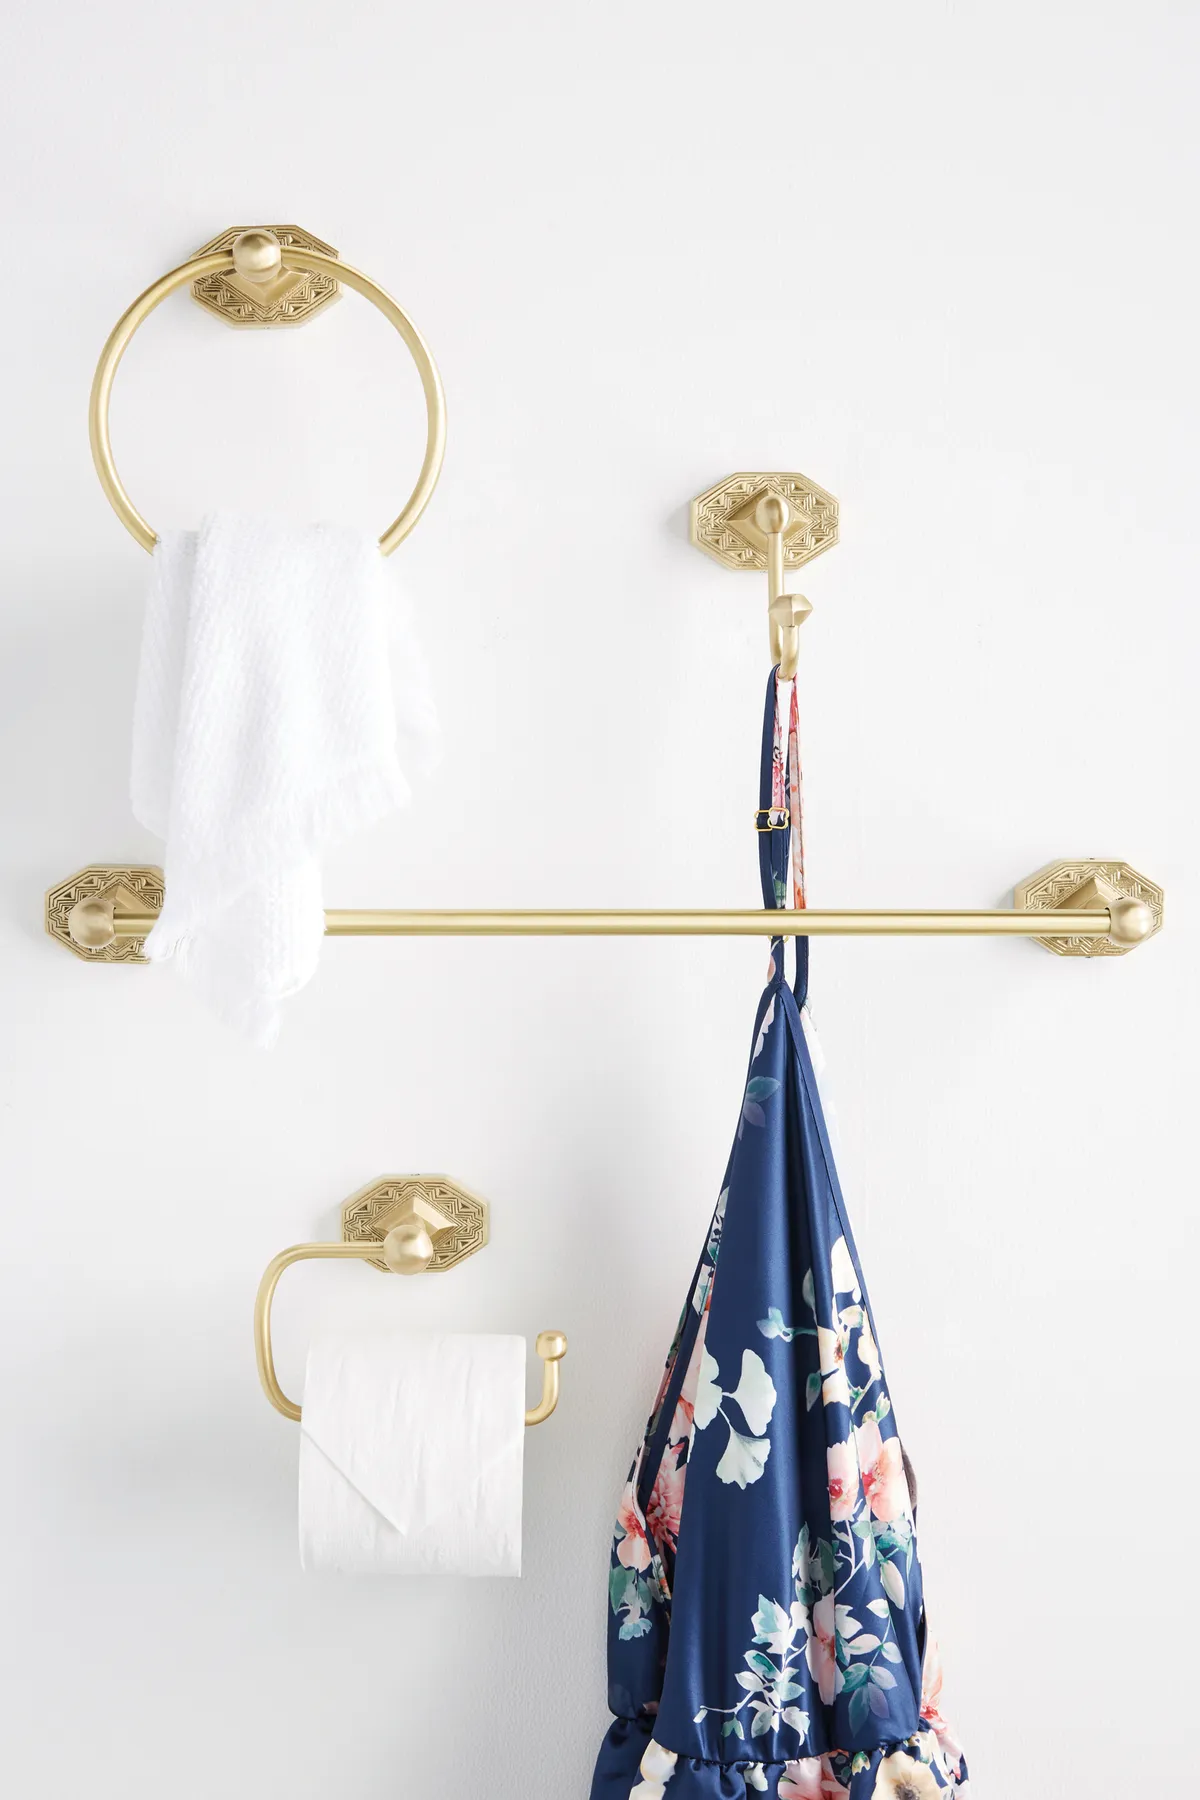 Ester towel bar, £32; Ester towel hook, £20; Ester towel ring, £36, all Anthropologie